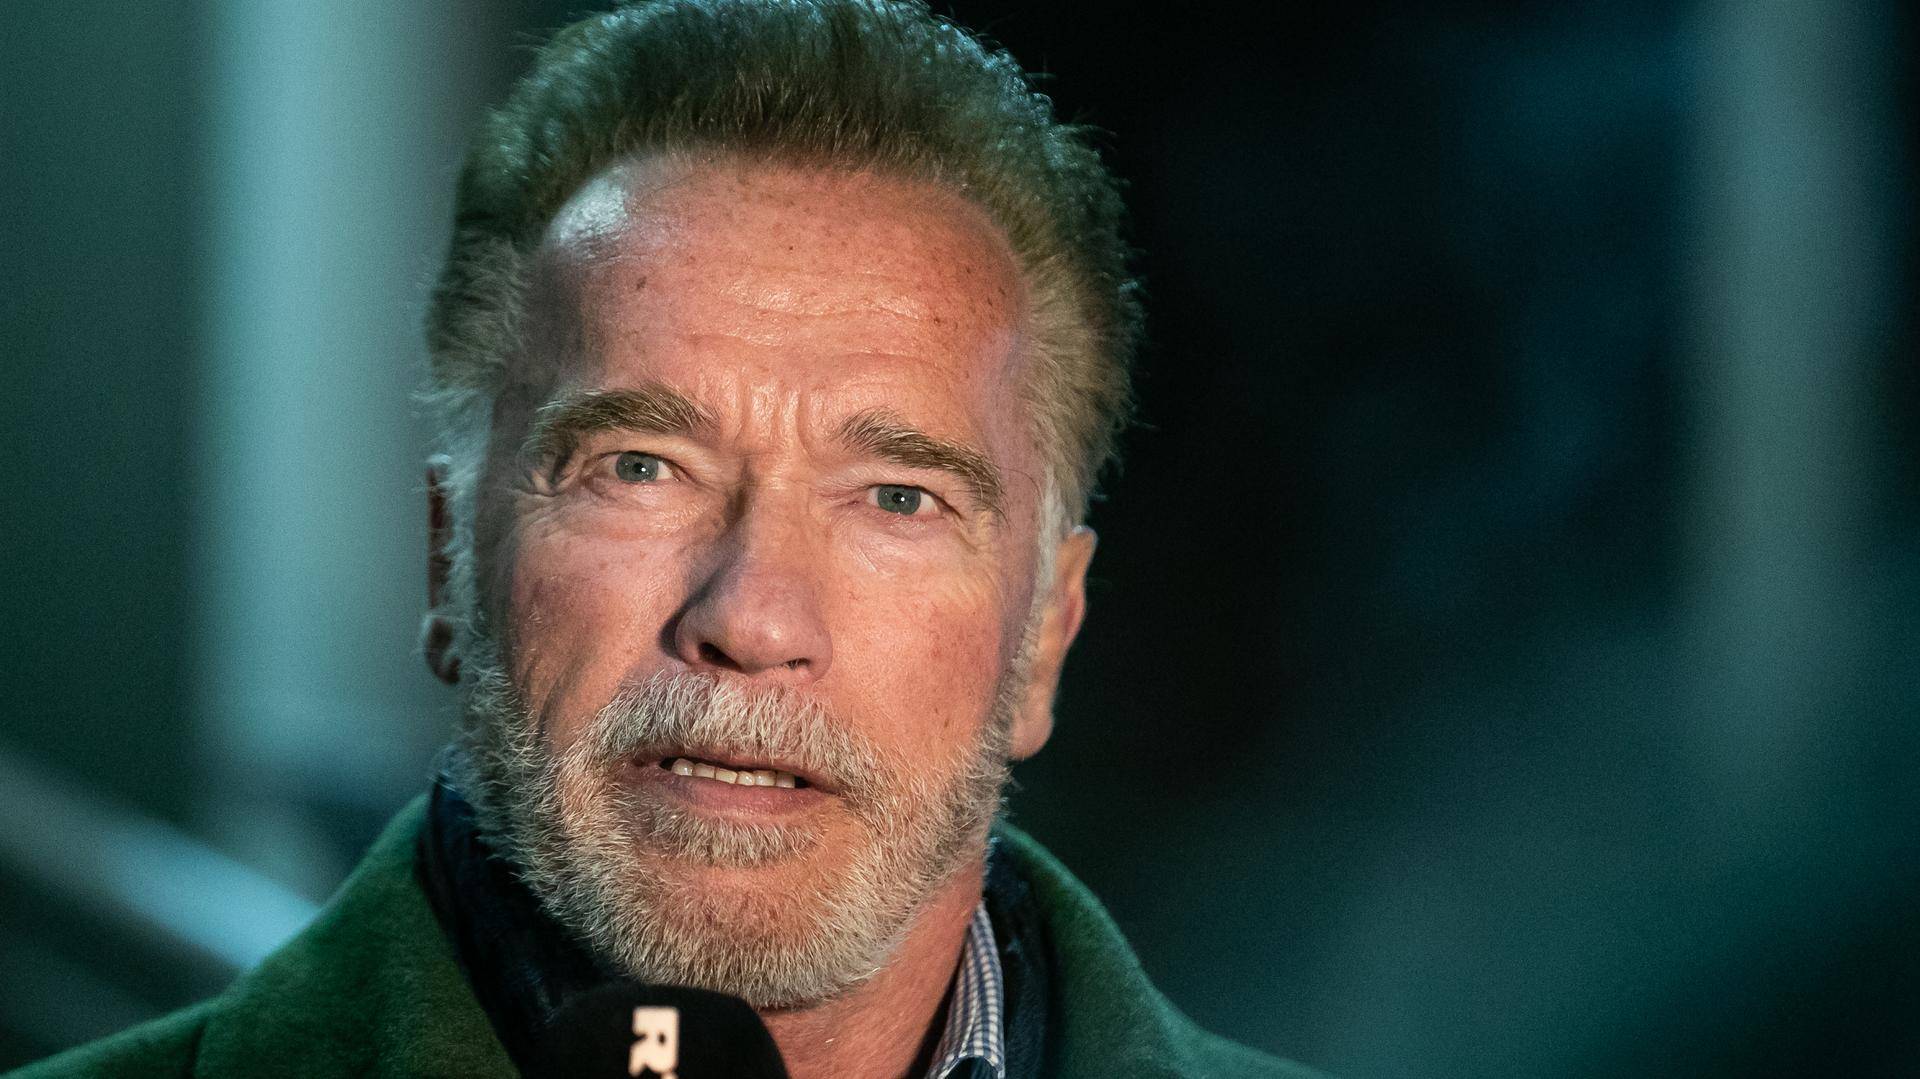 COP26: Arnold Schwarzenegger angered by world leaders' climate policies